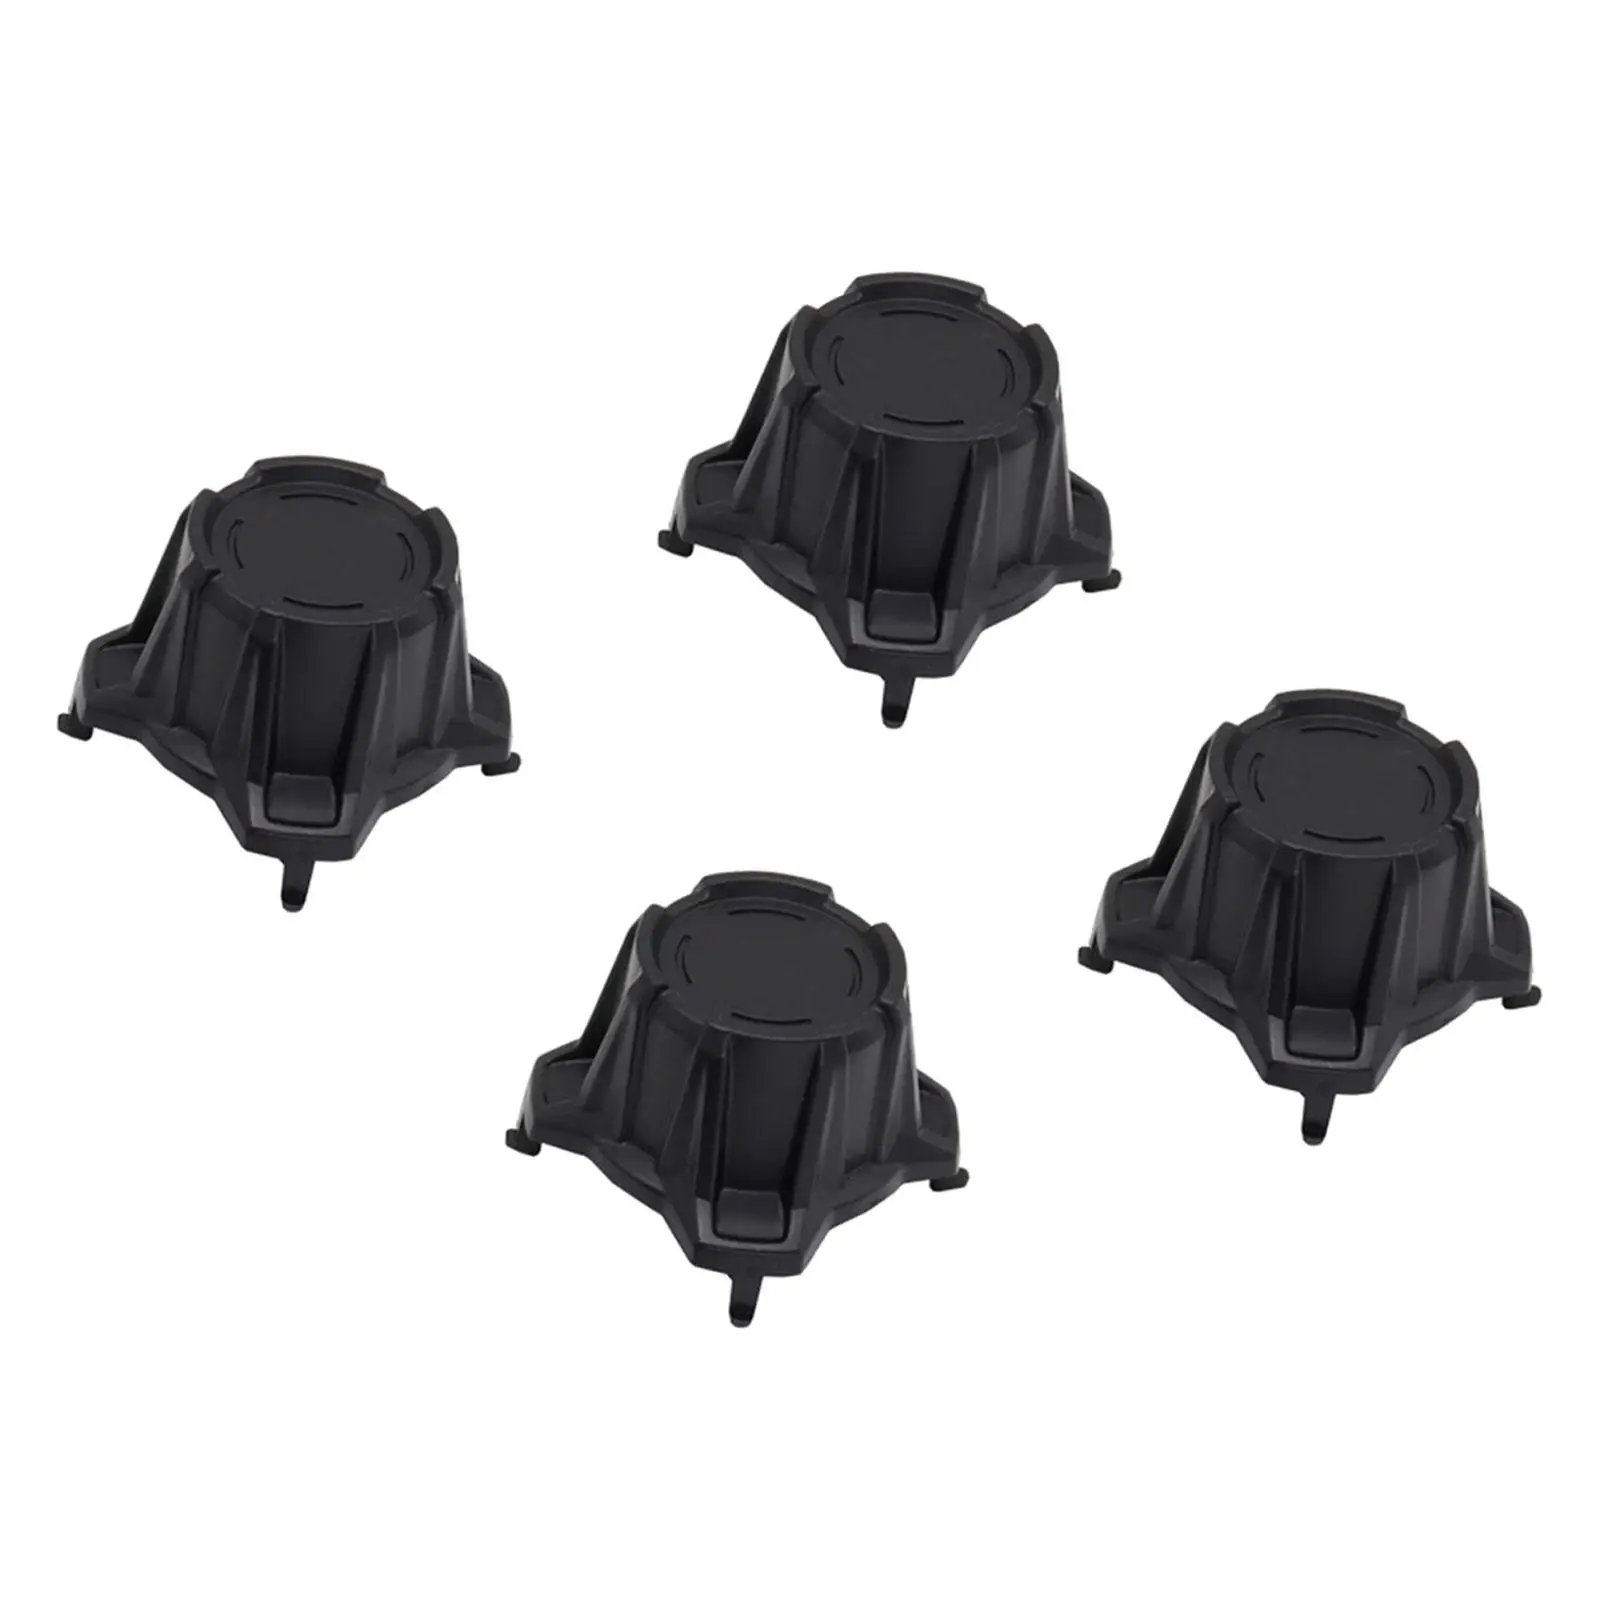 4 Pieces Tire Wheel Hub Caps Motorbike Easy Installation Cap Cover for x3 Repair Parts Replacement Professional Accessory